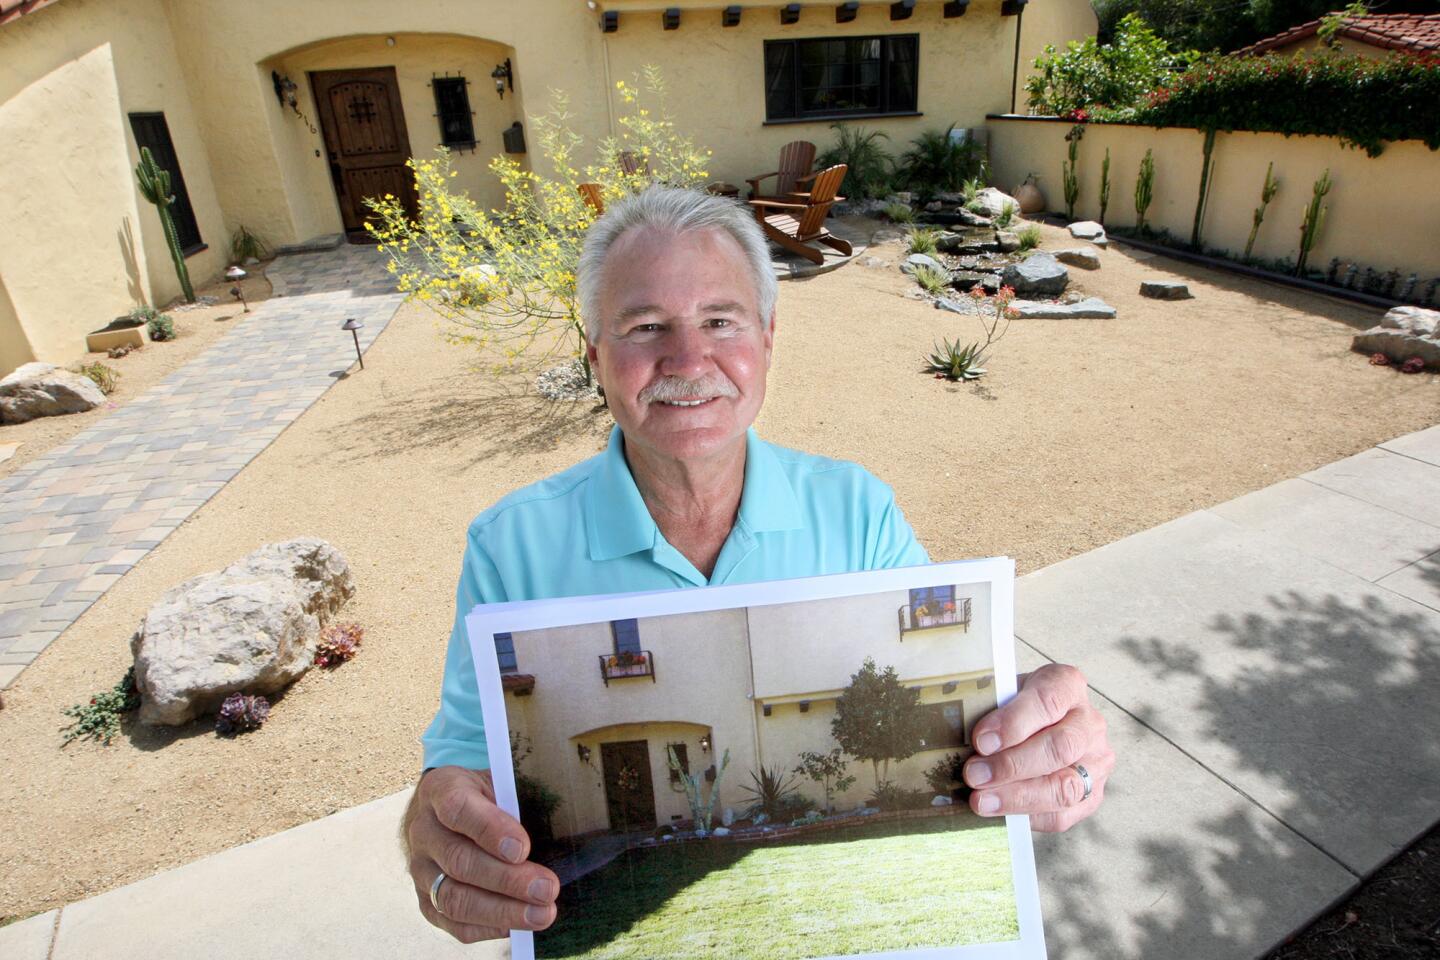 Glendale resident Bill Metzdorf stands in front of his new drought tolerant front yard holding a photo of the old lawn. Photographed on Thursday, April 30, 2015.